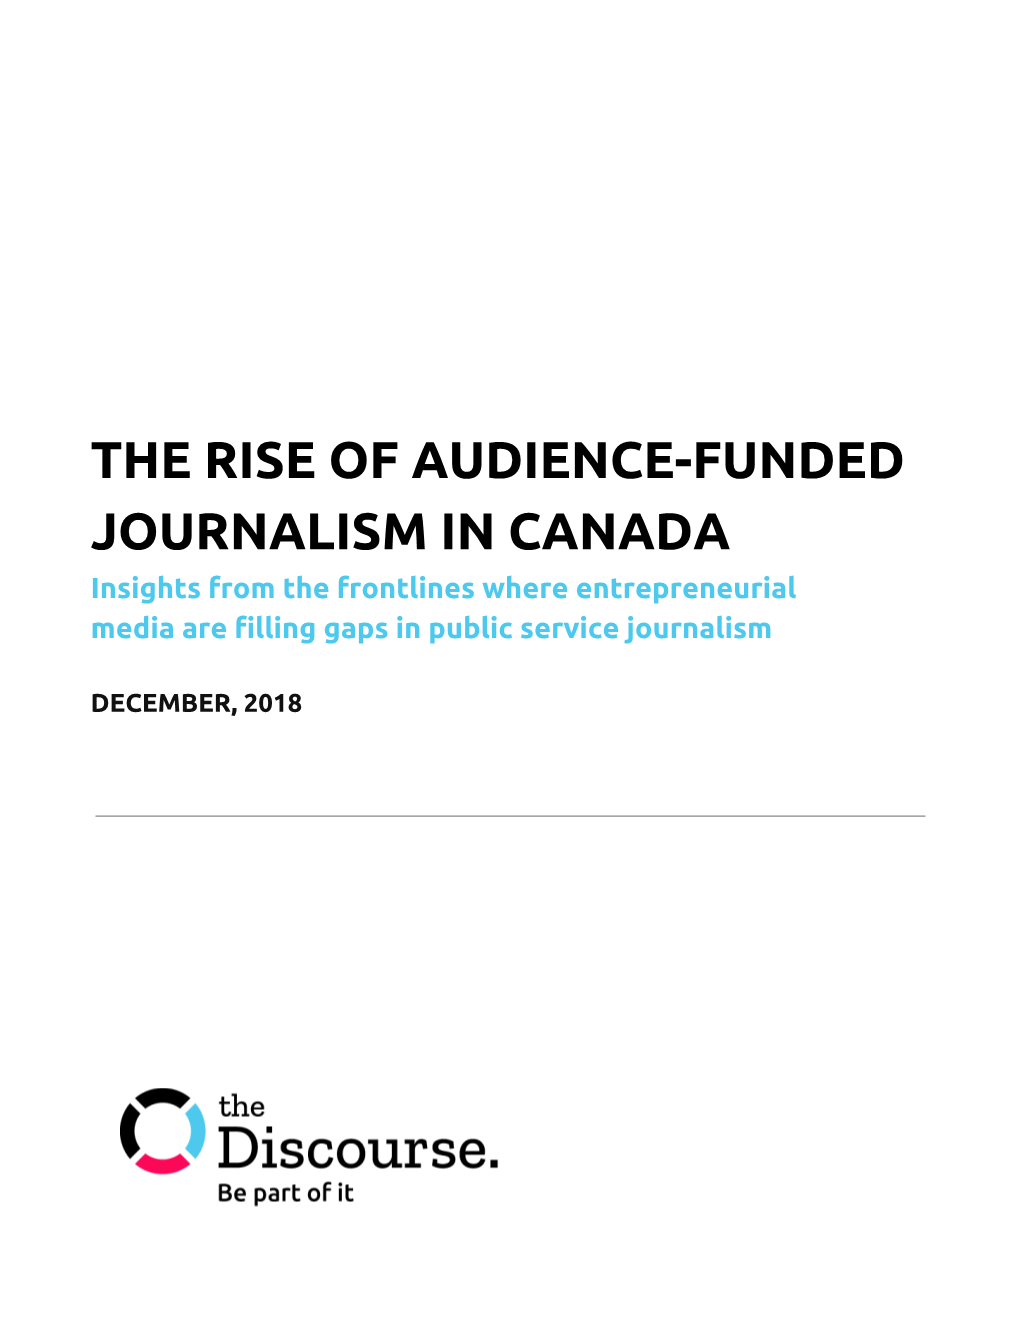 THE RISE of AUDIENCE-FUNDED JOURNALISM in CANADA Insights from the Frontlines Where Entrepreneurial Media Are Filling Gaps in Public Service Journalism